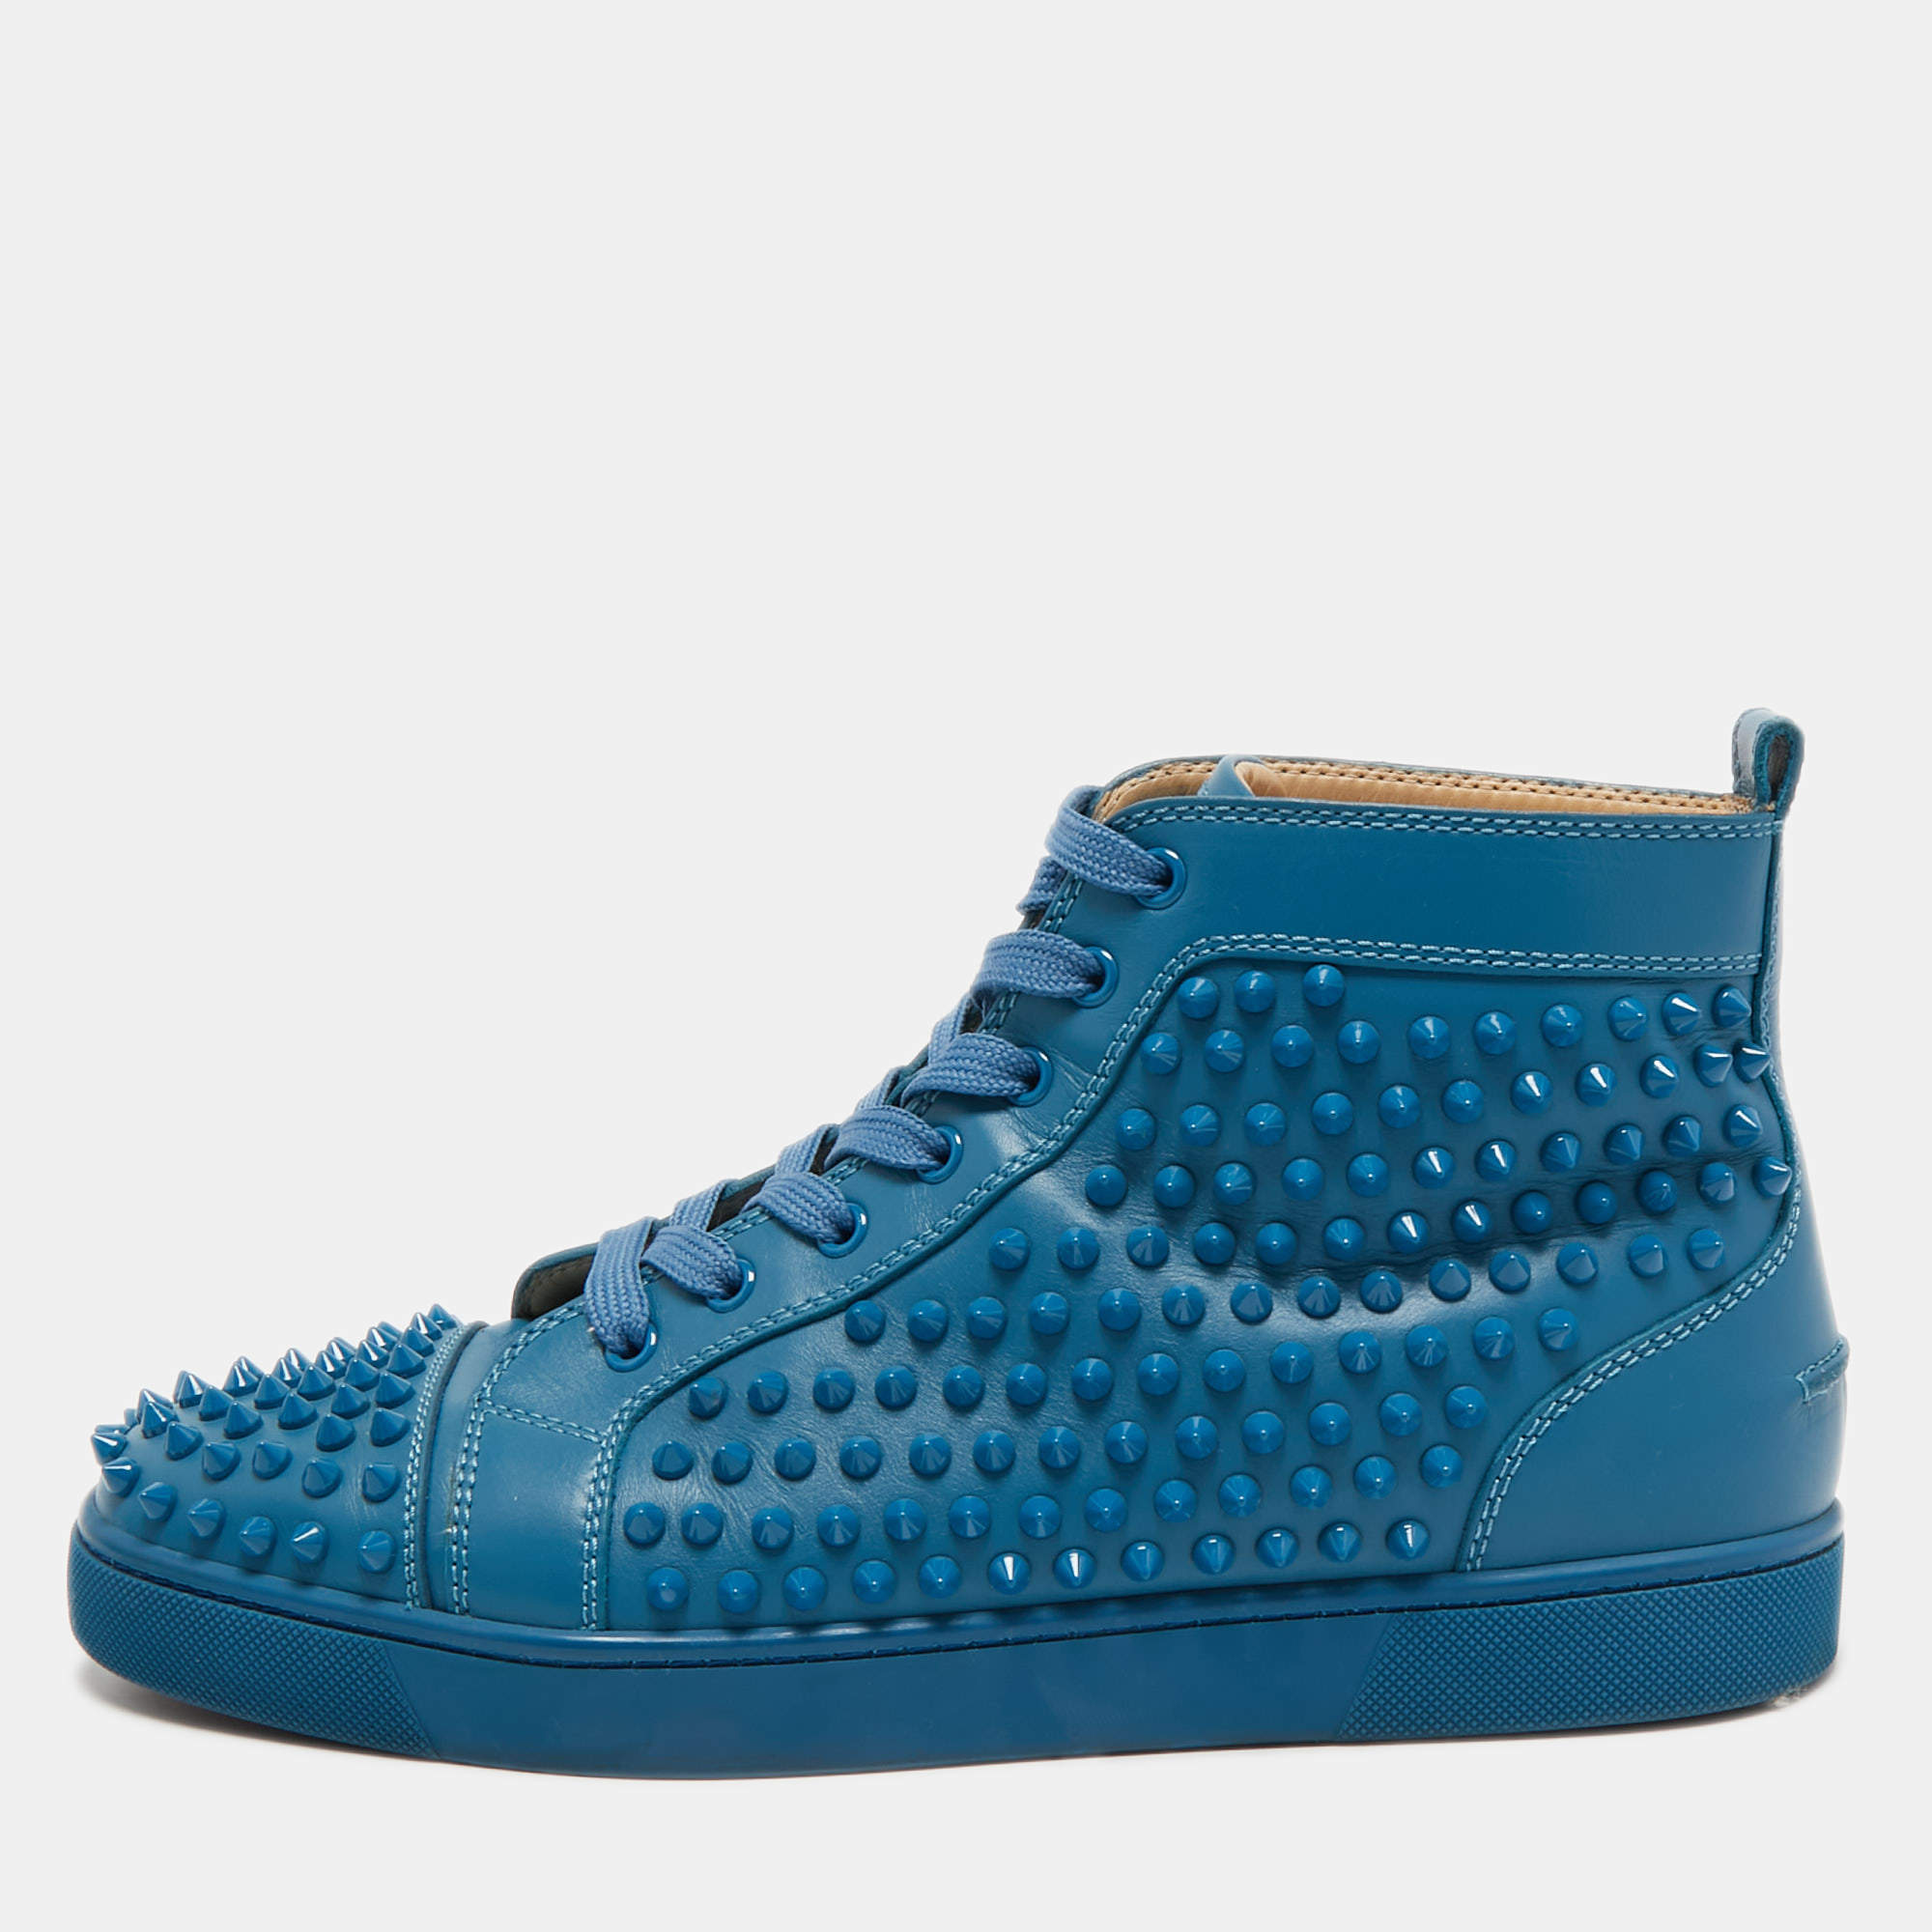 Louis high trainers Christian Louboutin Blue size 41 EU in Other - 32678831